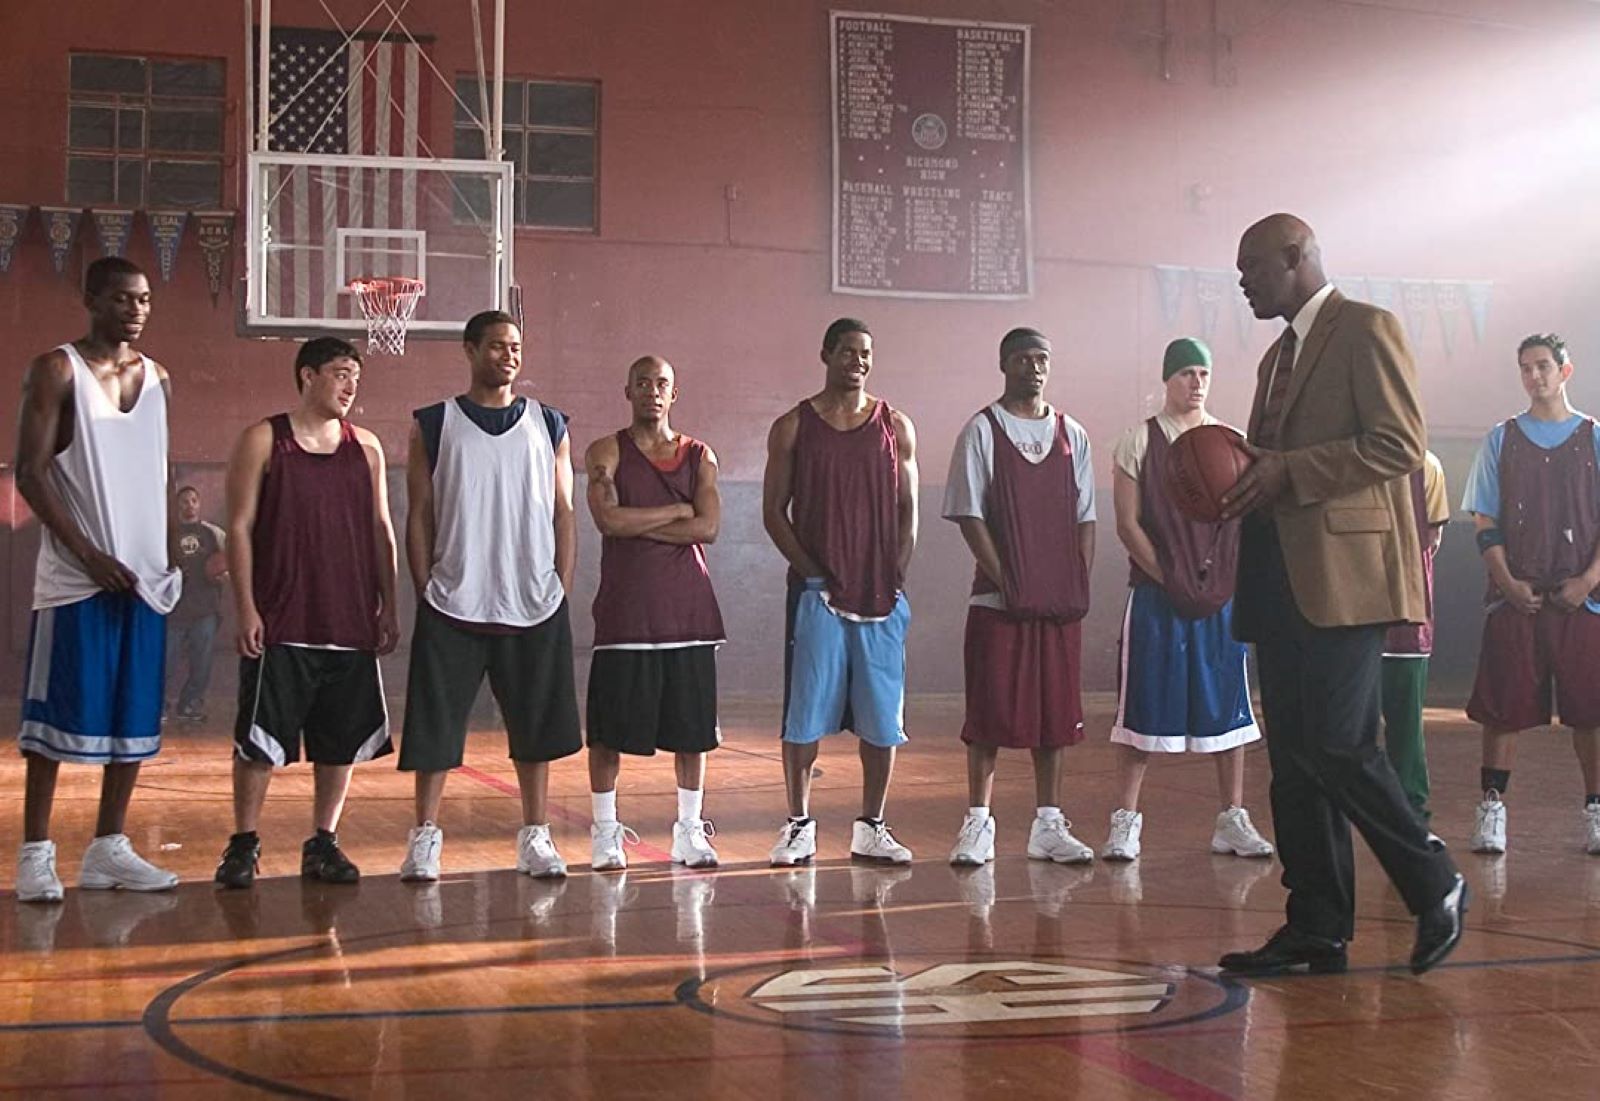 Need a sports fix? Here are the best basketball movies of all time